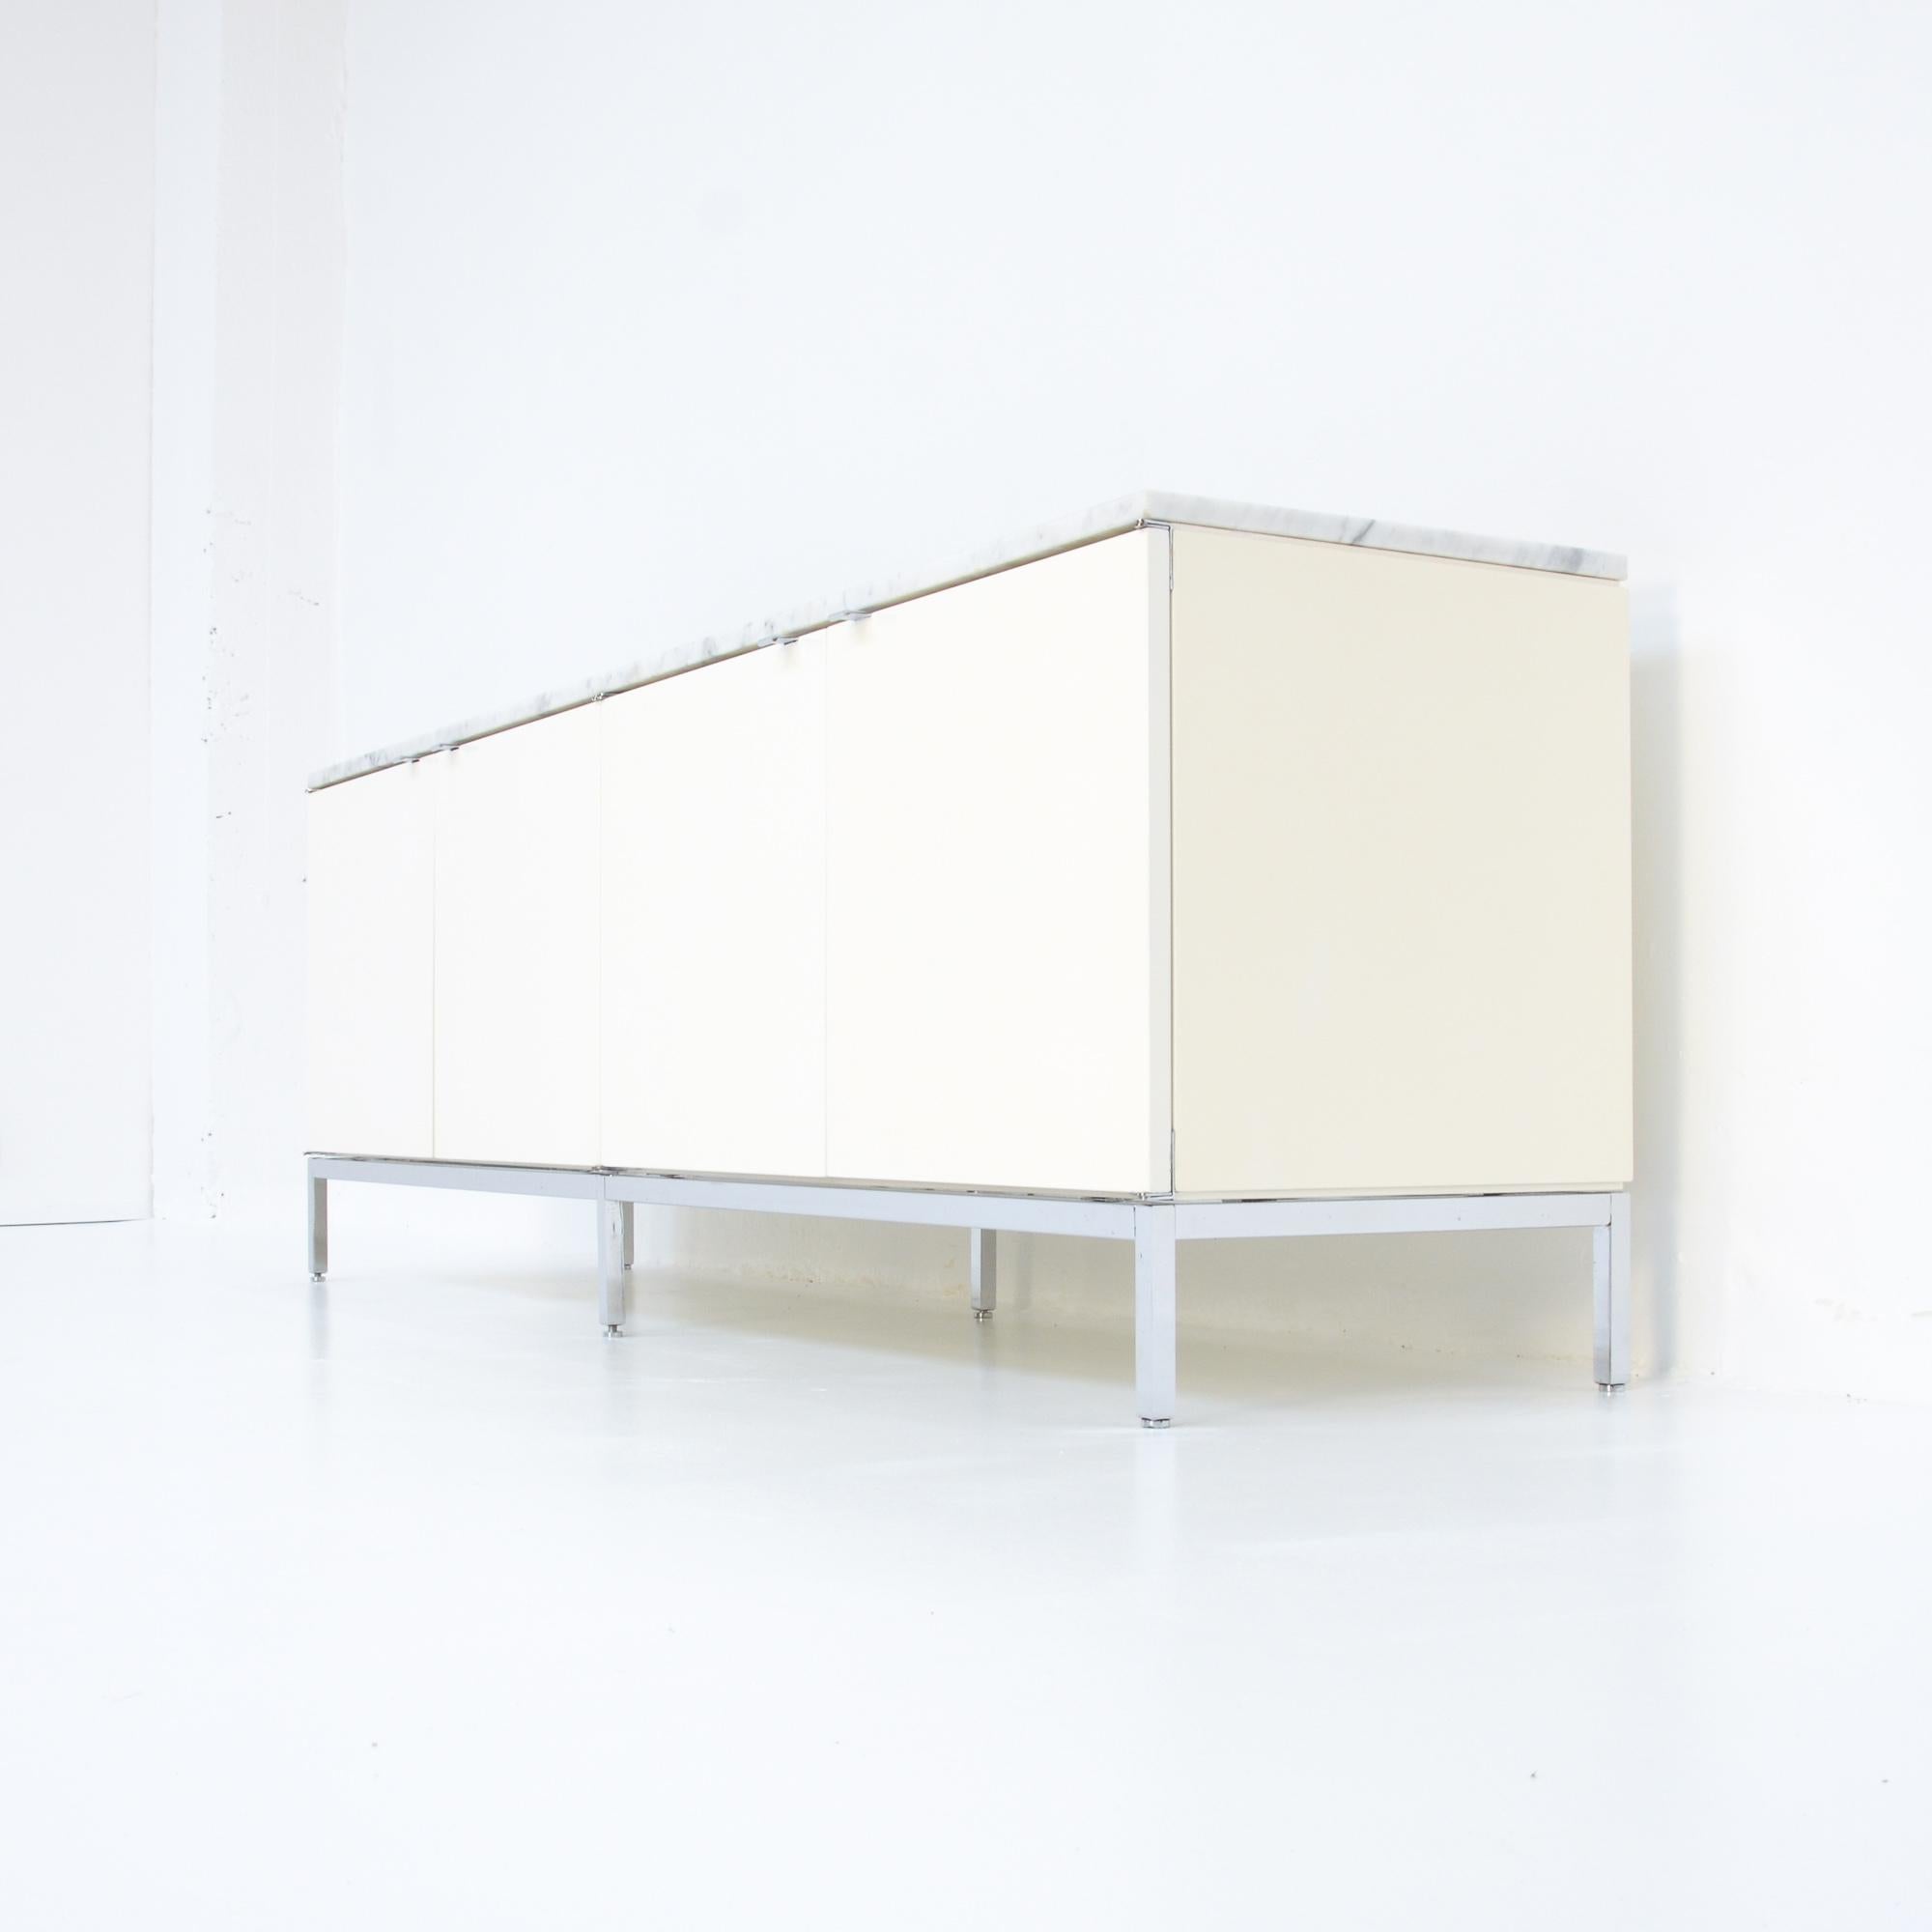 This Minimalist credenza was designed by Florence Knoll in 1961 for Knoll Int.
Florence Knoll revolutionized private office design by replacing the executive desk with a table, so she needed a place for all the stuff that’s normally in the desk